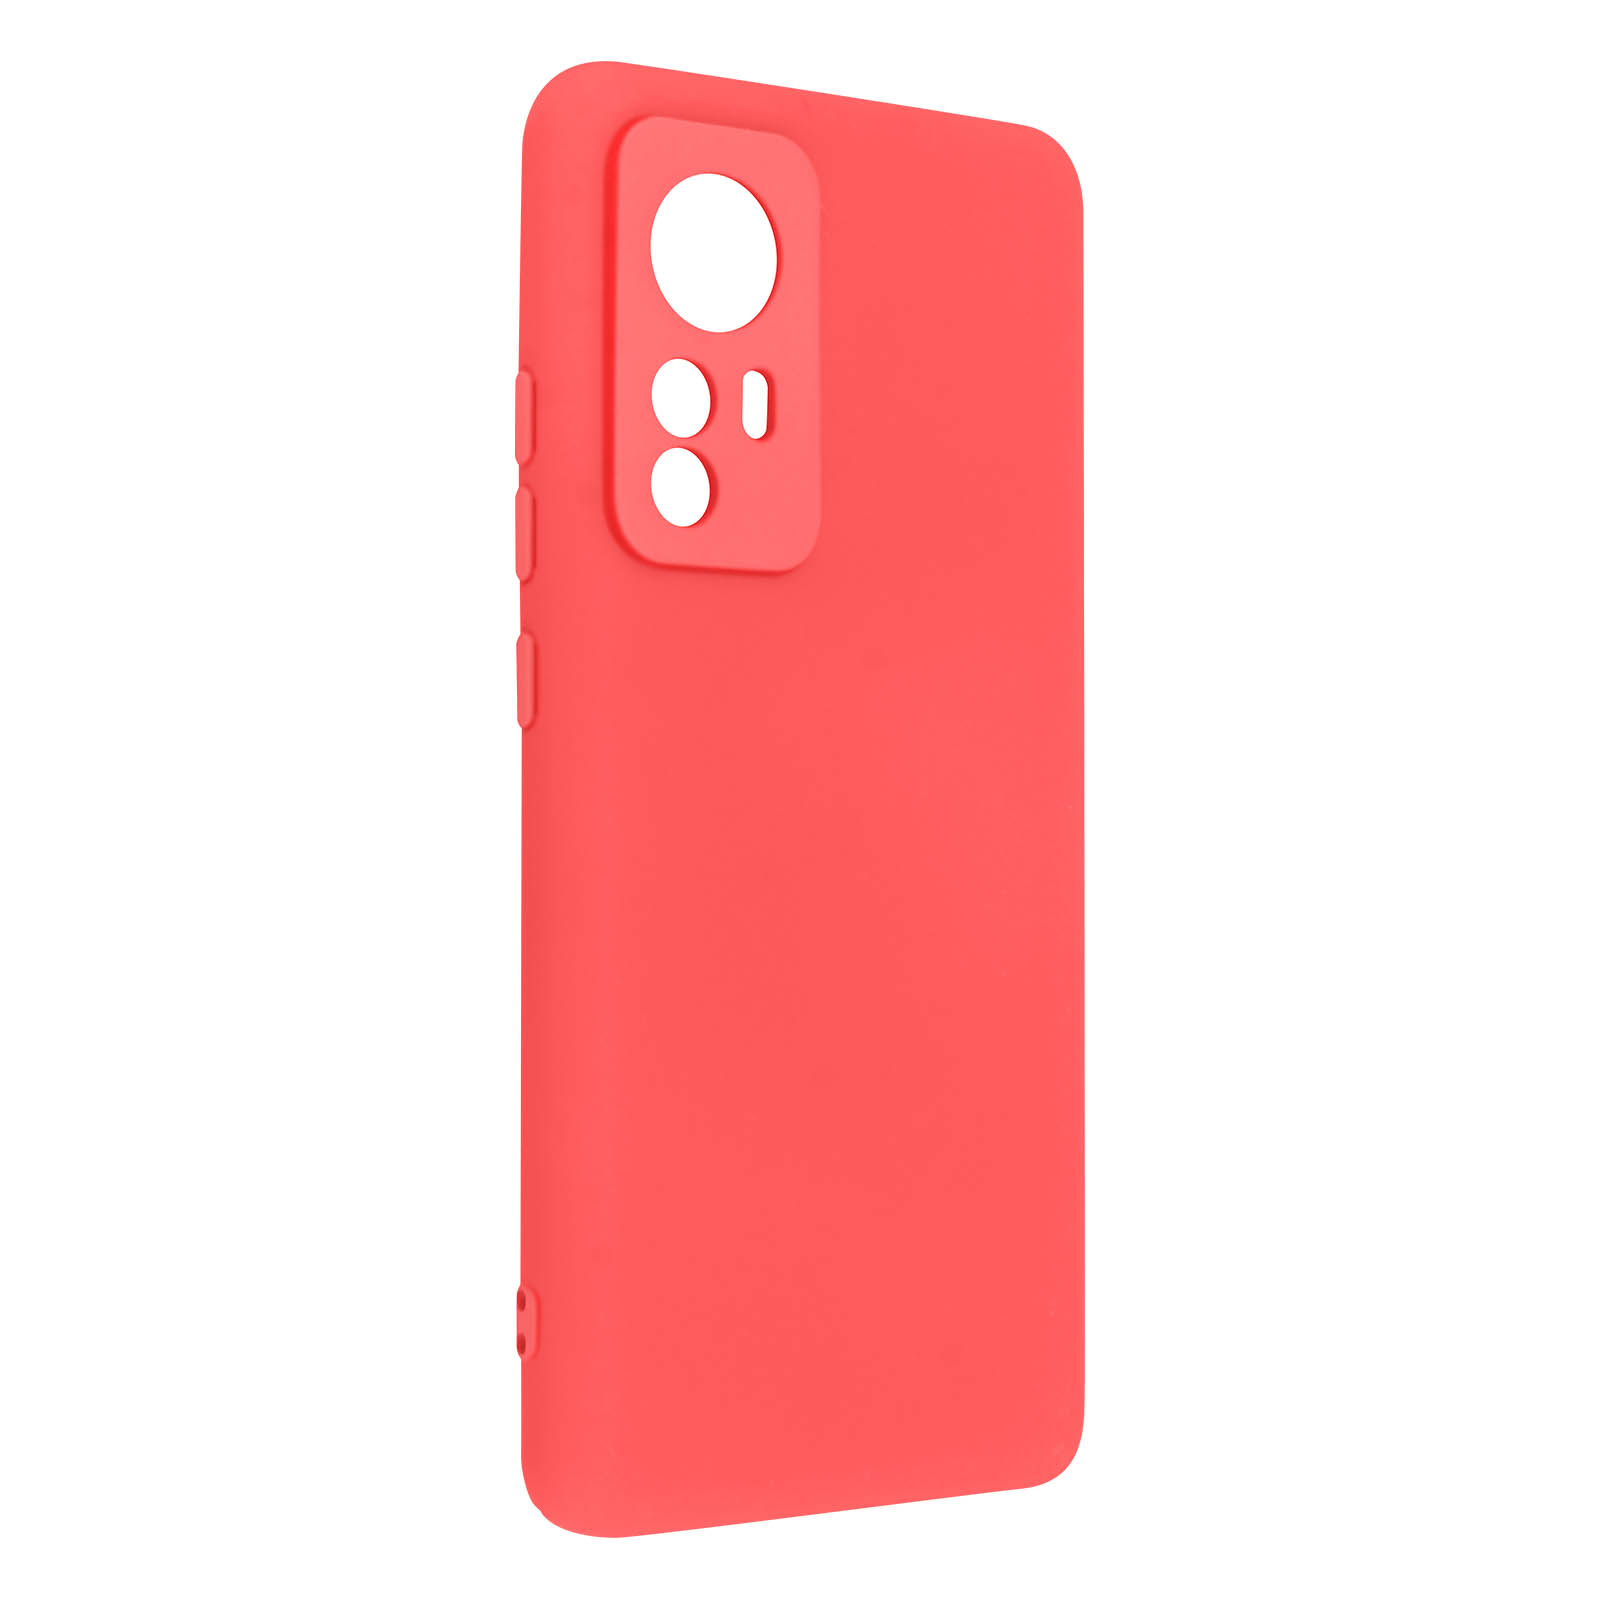 12T Backcover, Pro, Series, AVIZAR Soft Touch Xiaomi, Fuchsienrot